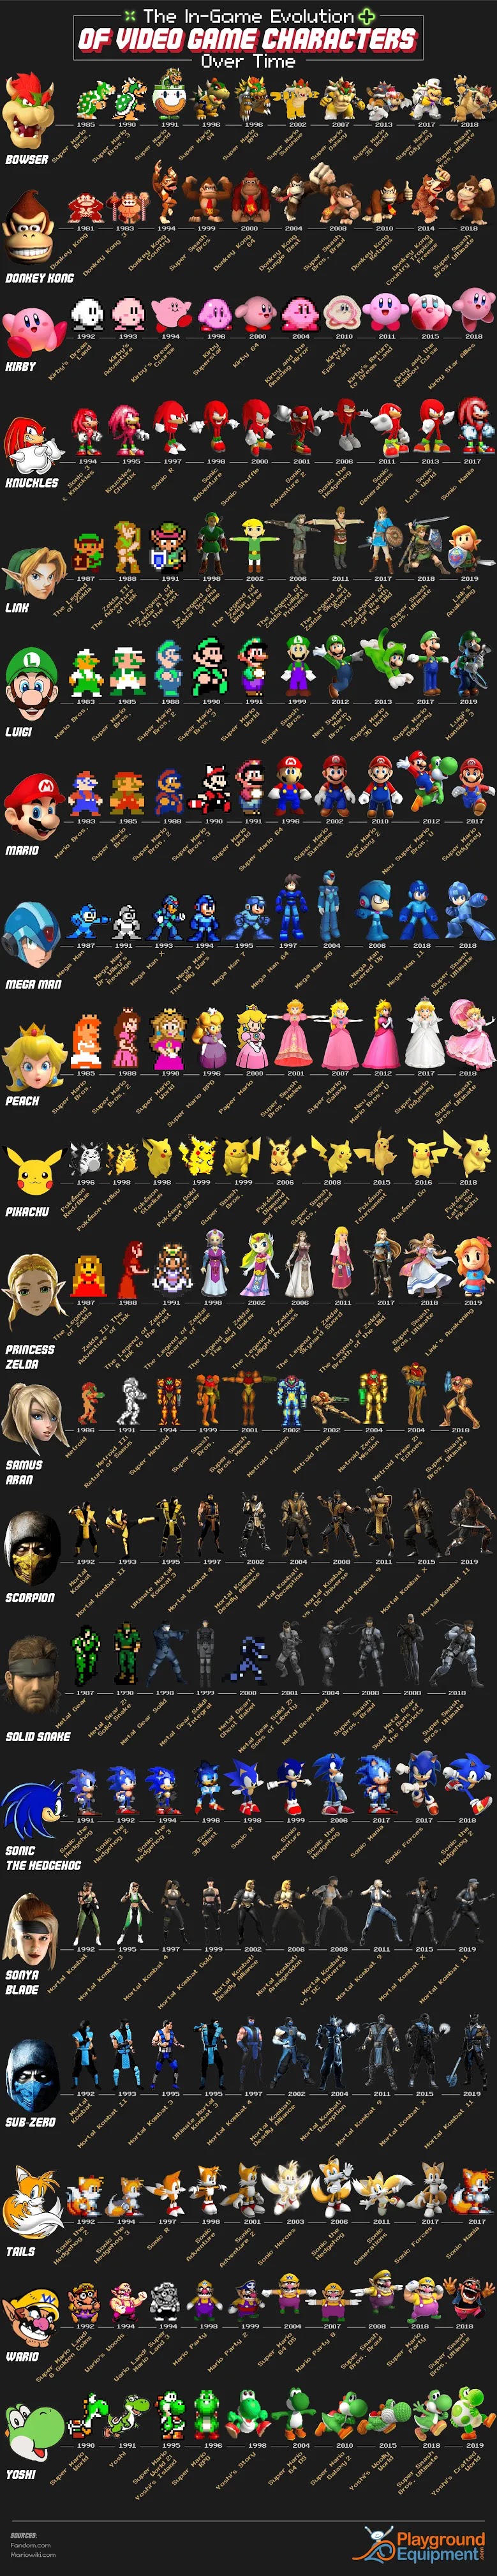 The In-Game Evolution Of Video Game Characters Over Time #Infographic